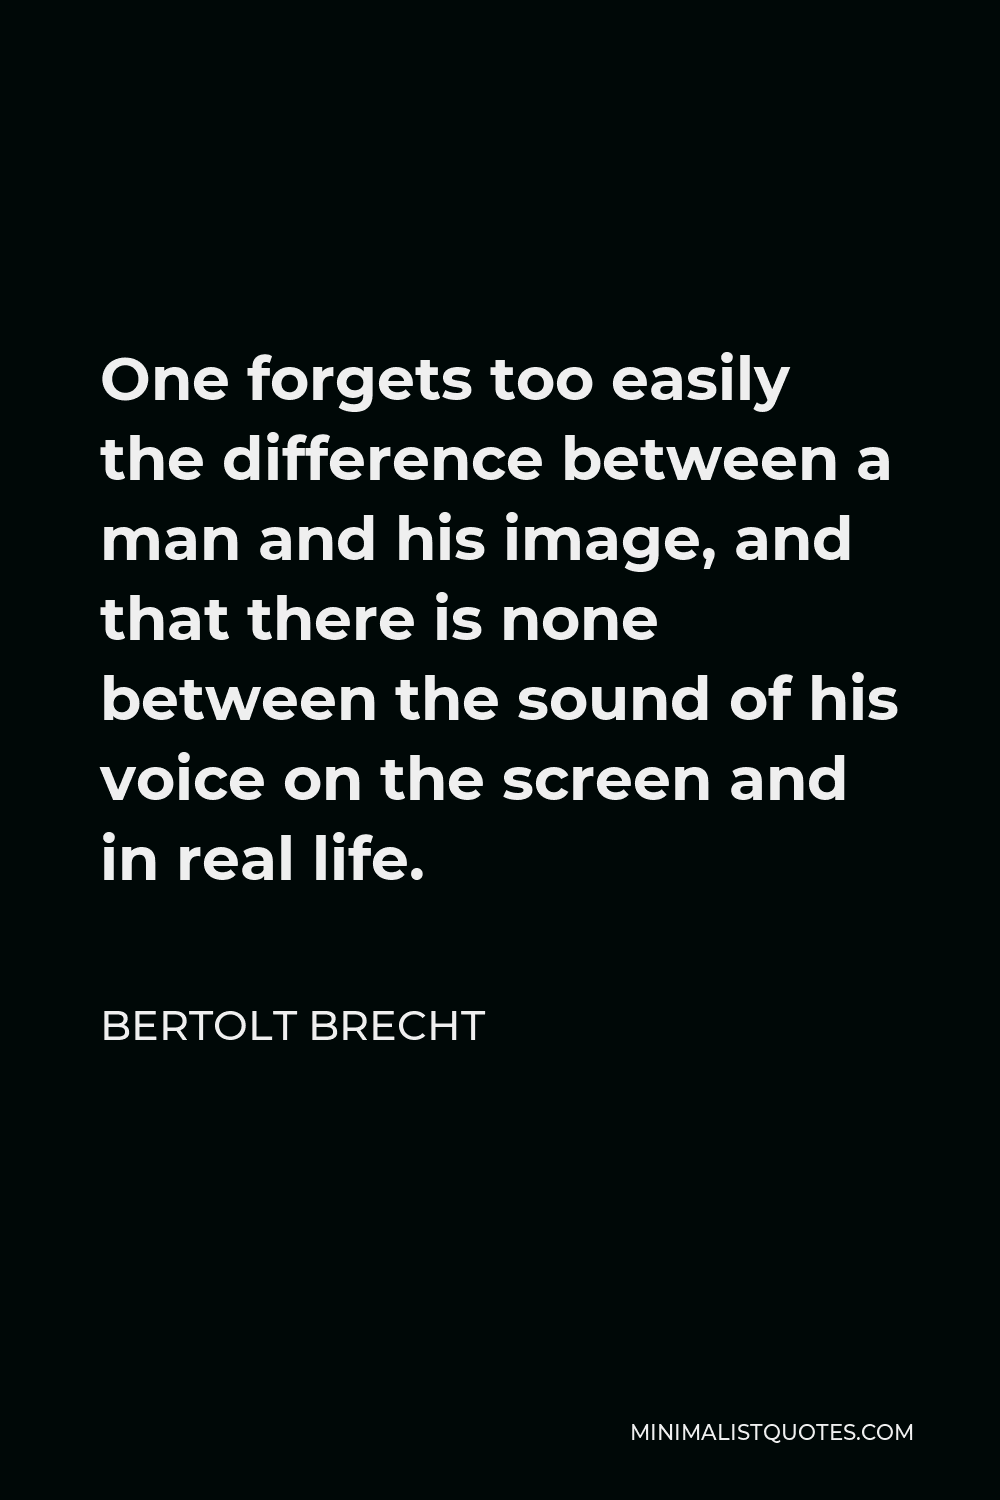 Bertolt Brecht Quote - One forgets too easily the difference between a man and his image, and that there is none between the sound of his voice on the screen and in real life.